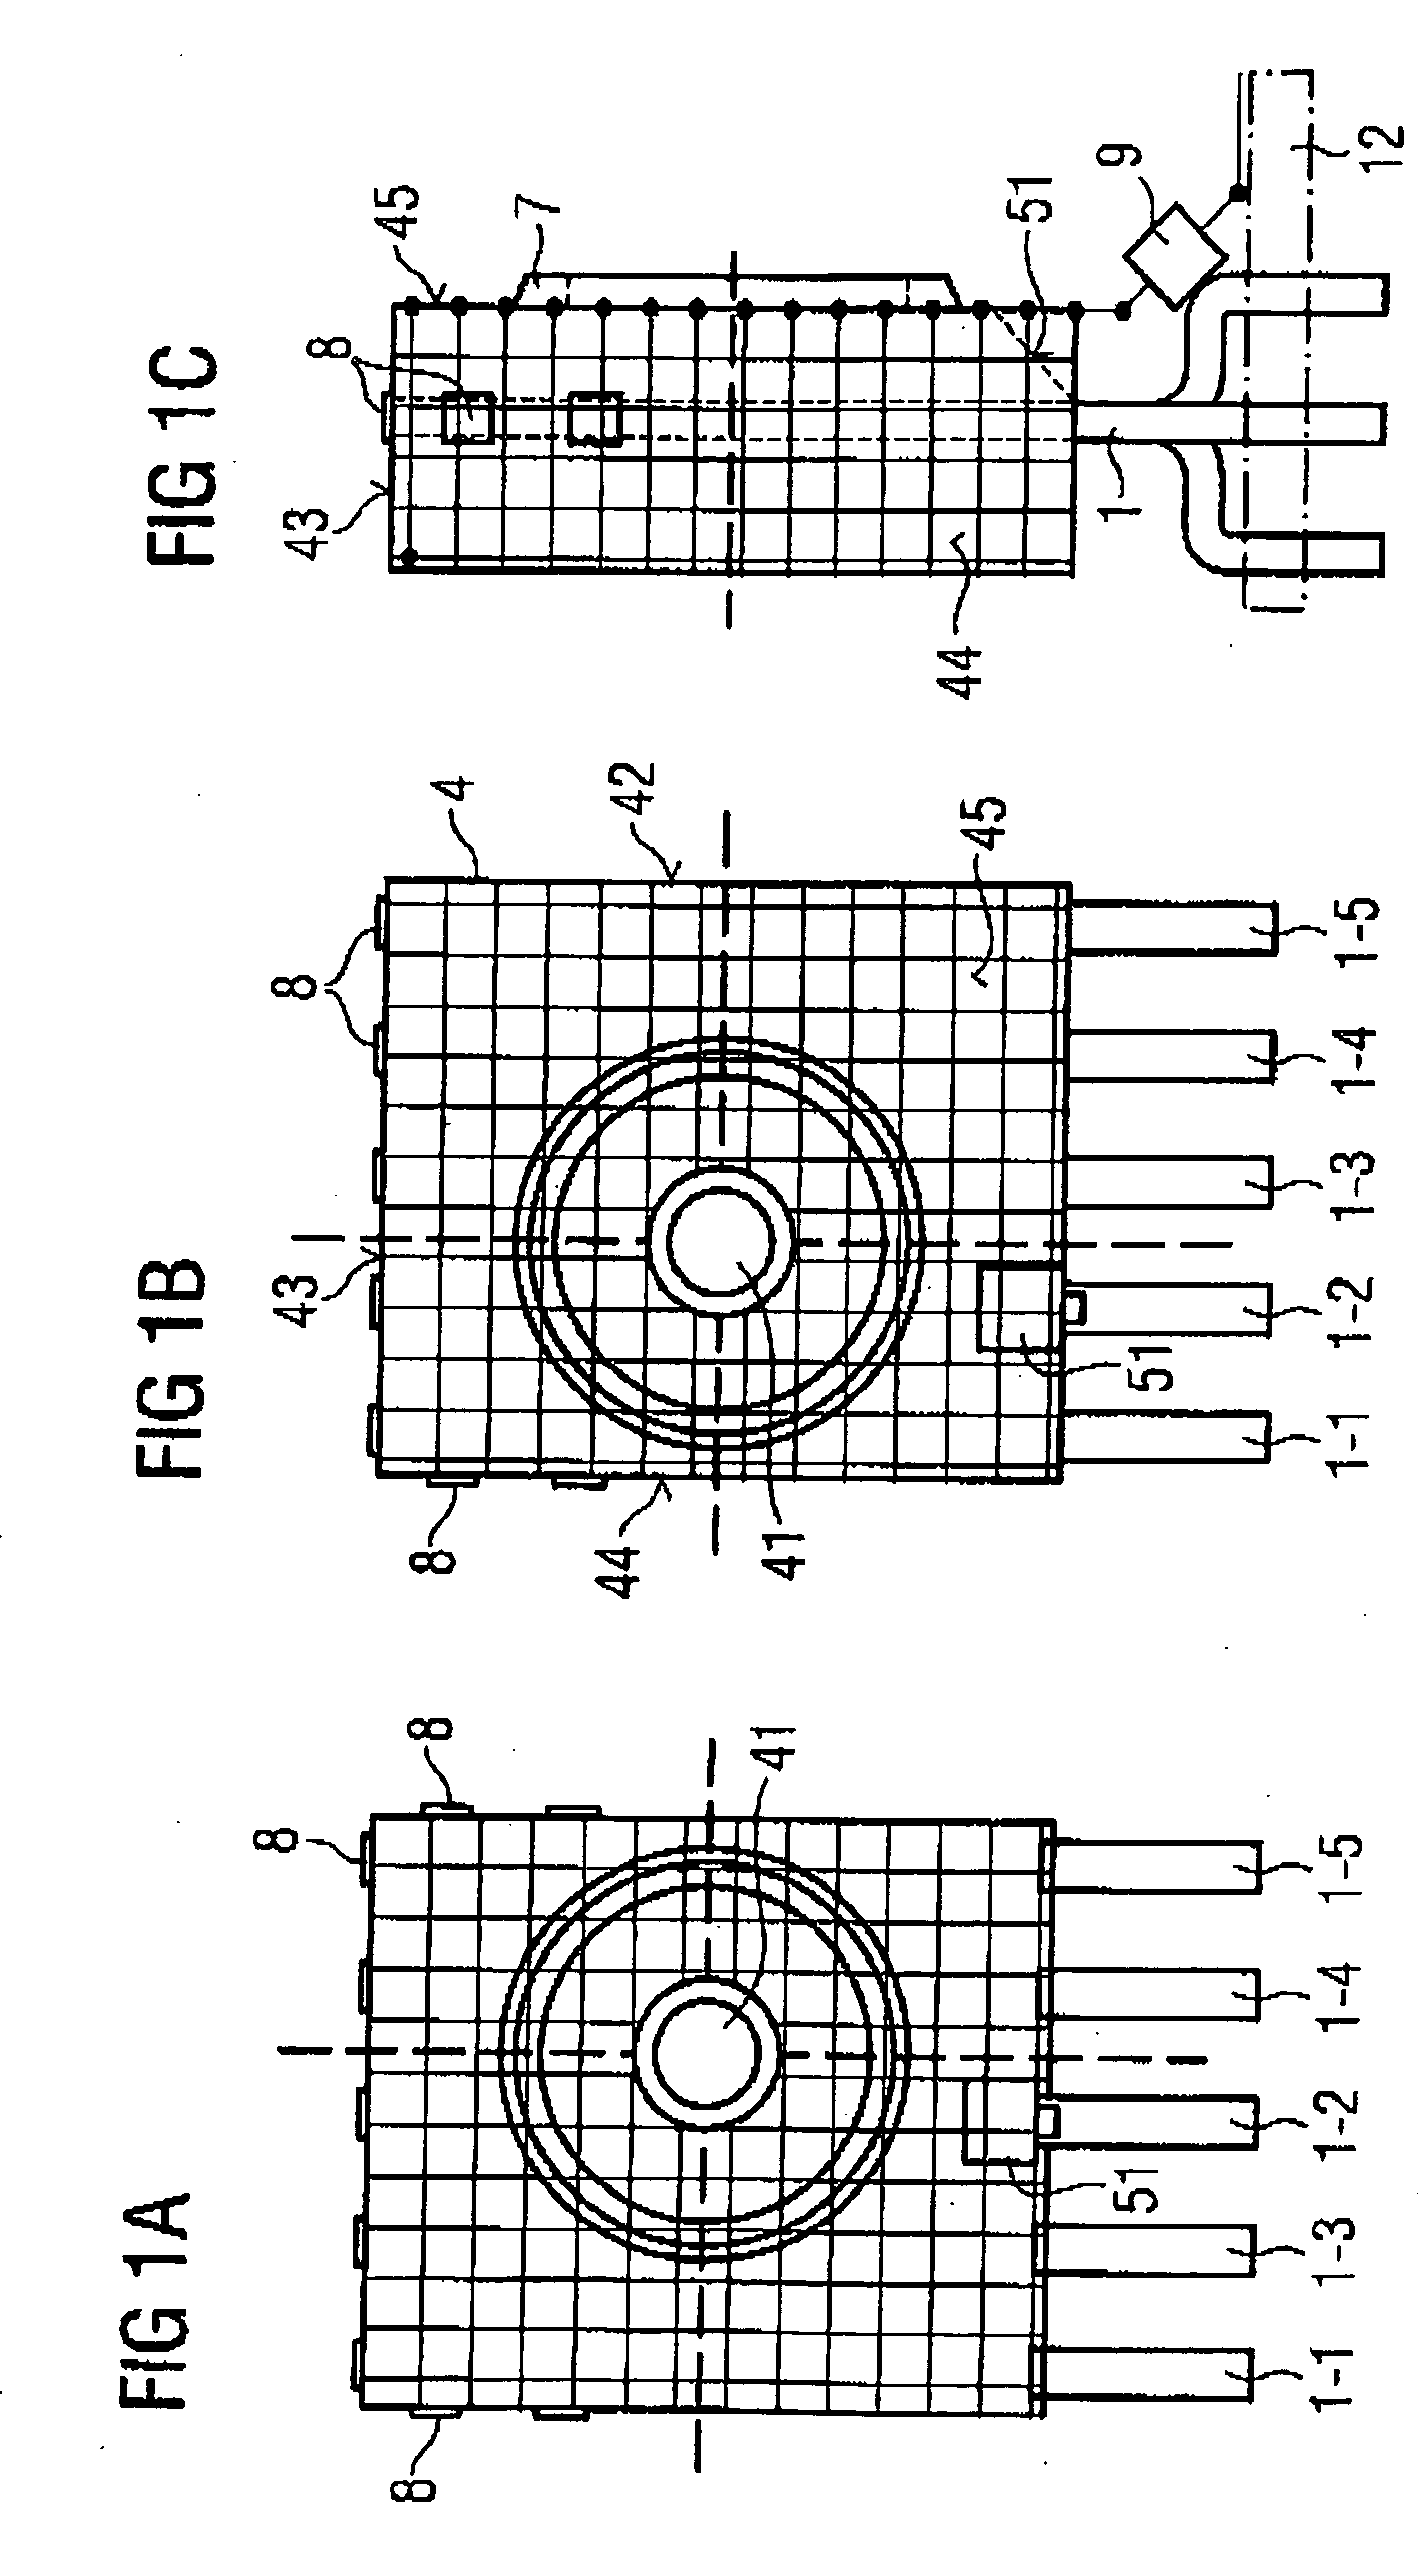 Optoelectronic apparatus with a shielding cage, and methods for production of an optoelectronic apparatus with a shielding cage.